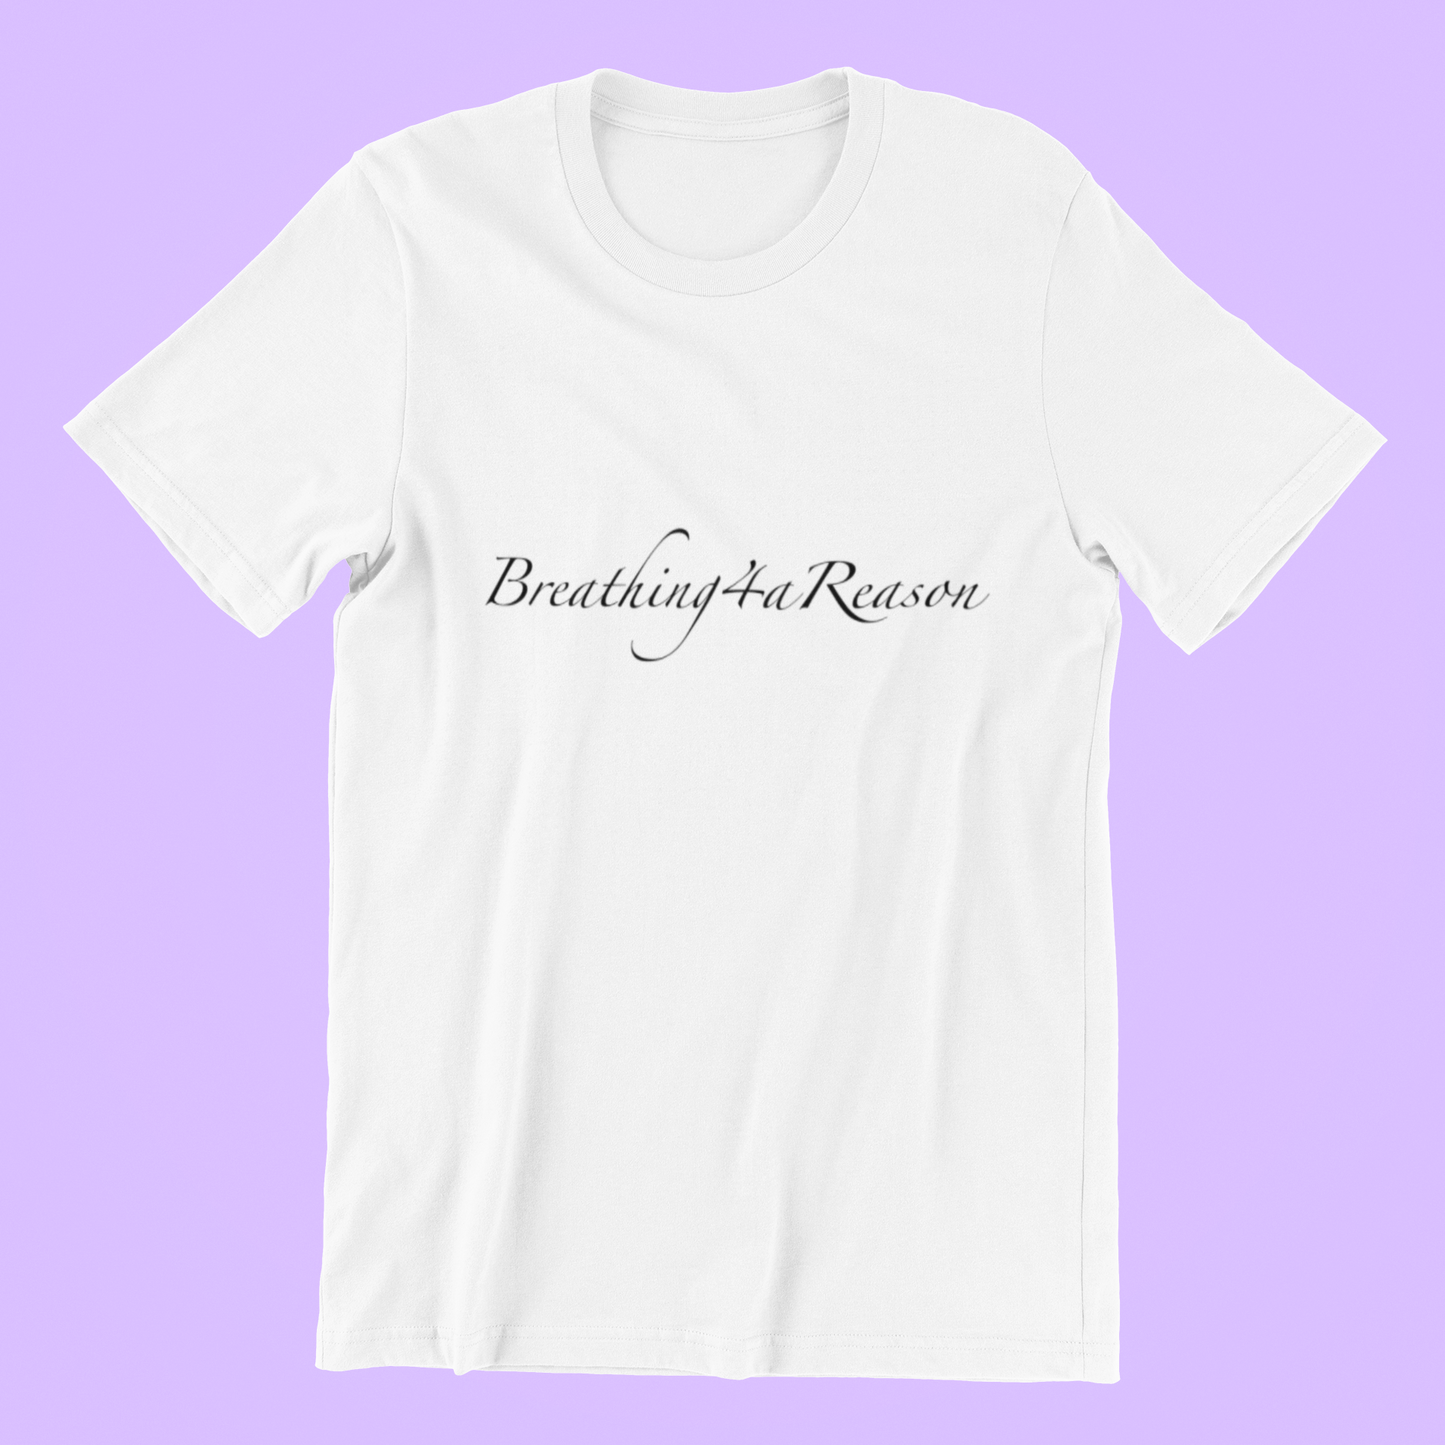 Breathing4aReason White Unisex Tees, Scripted Writing Across Center